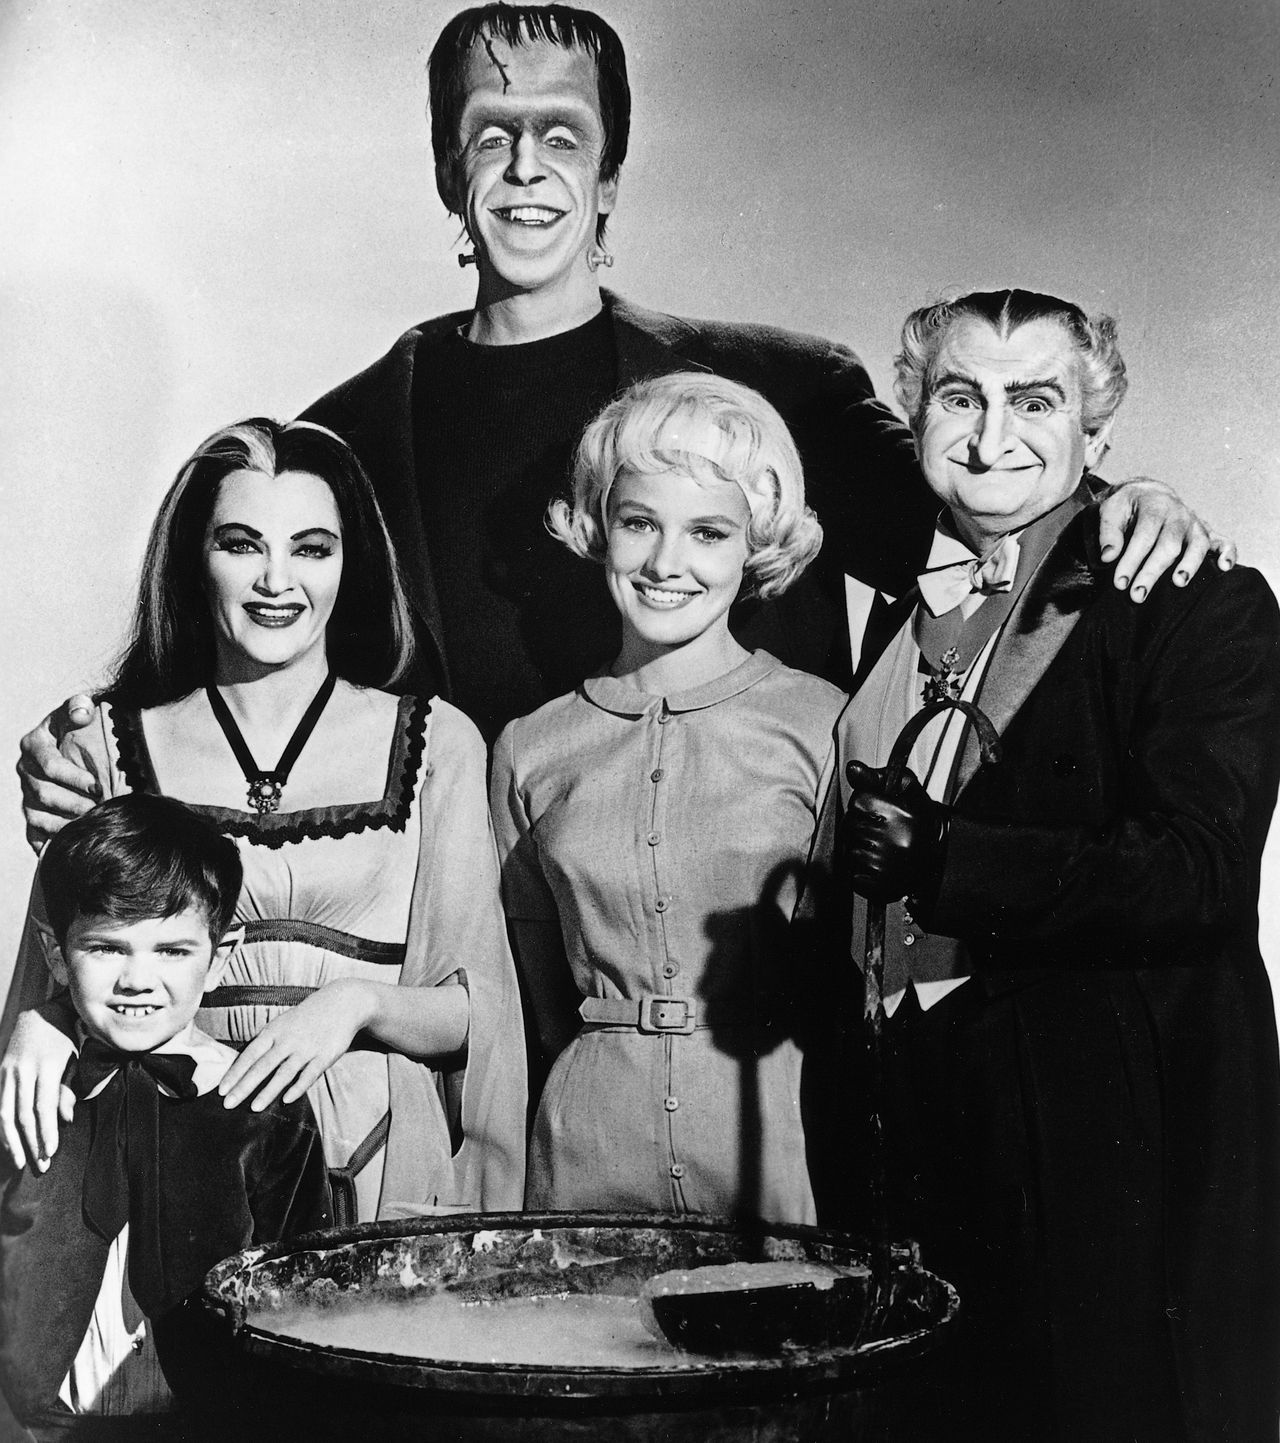 Sorry, But If You’re Not a Fan of 📺 Sitcoms, Don’t Even Bother Taking This Quiz The Munsters